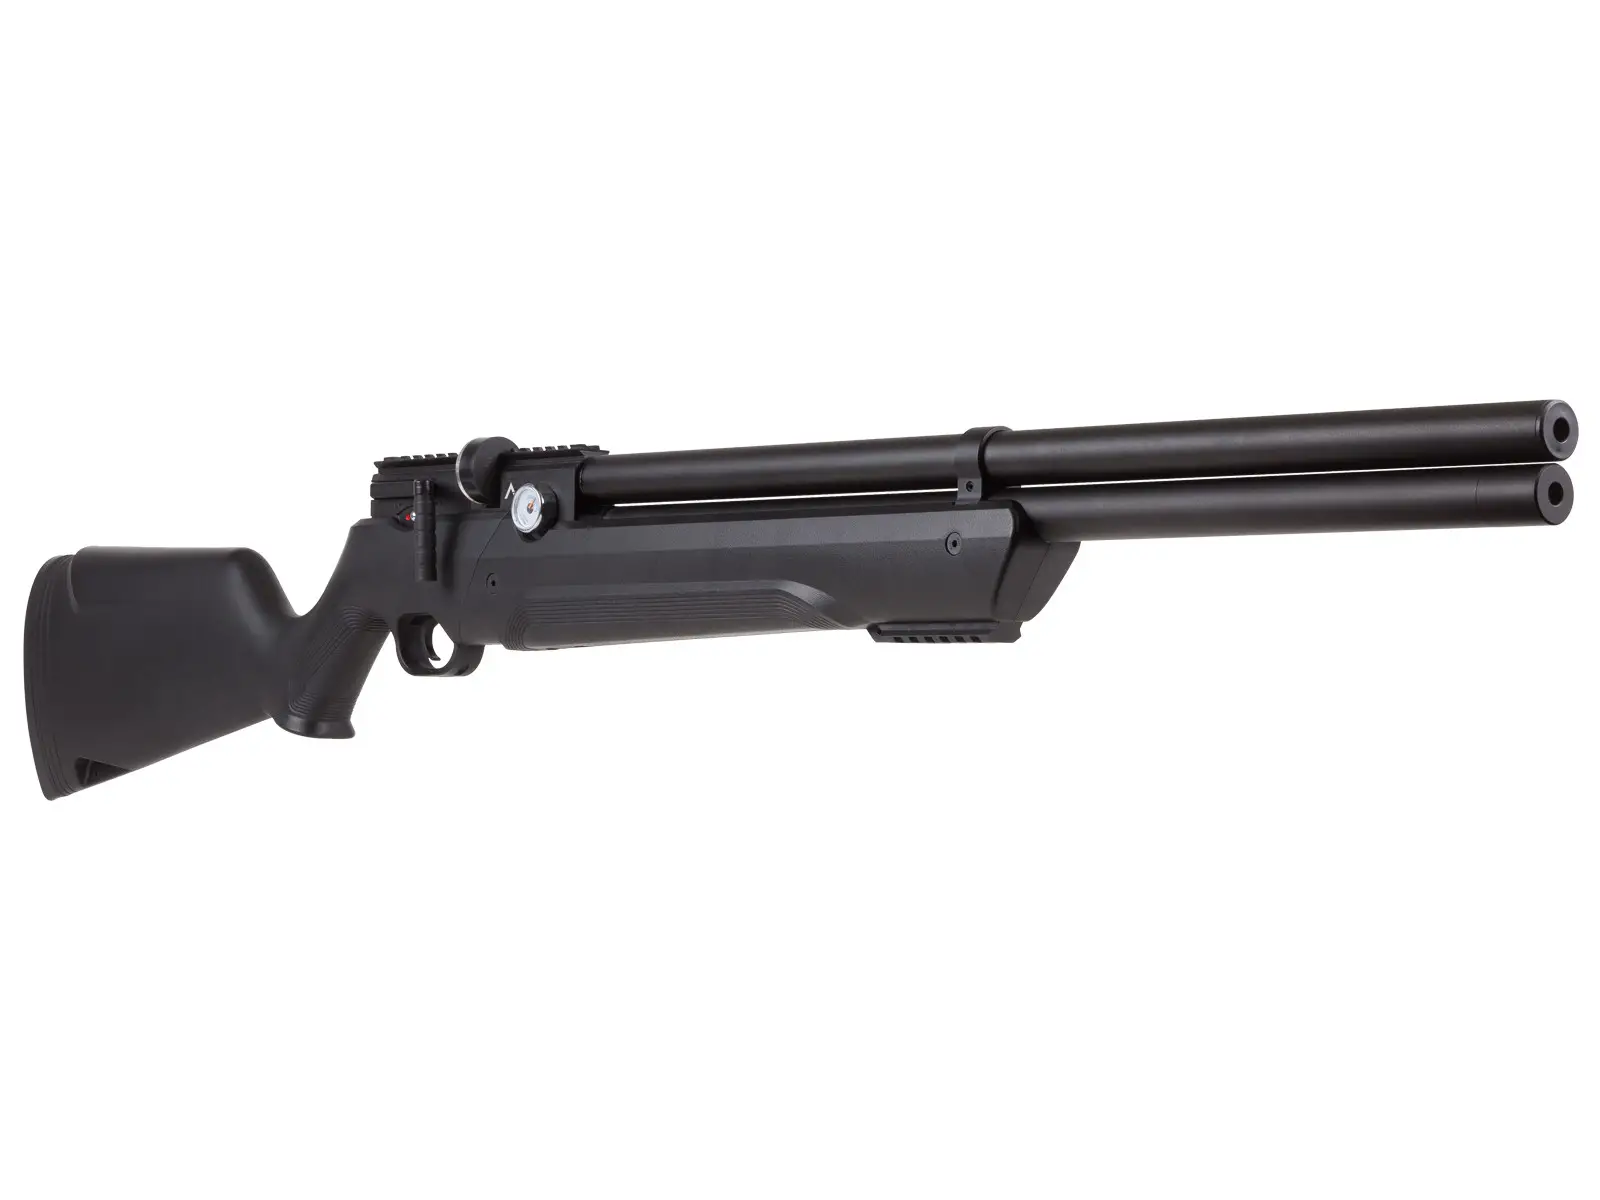 avenger2 Best PCP air rifles - 15 of the best PCP guns you can buy right now (Reviews and Buying Guide 2022)